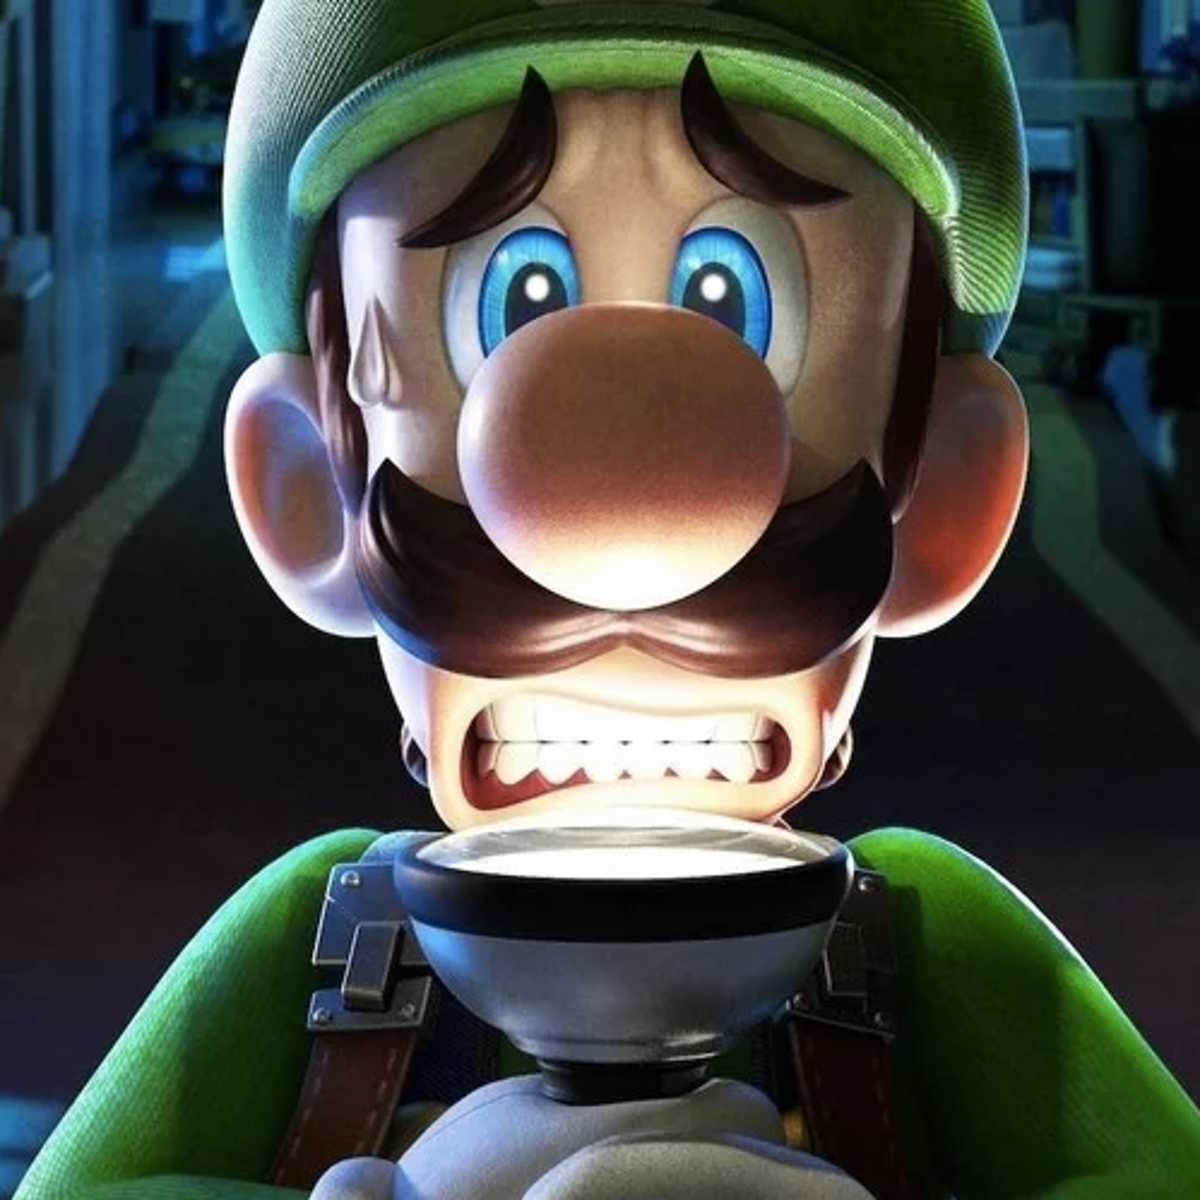 UK Charts: Luigi's Mansion 3 is the biggest Switch launch of 2019